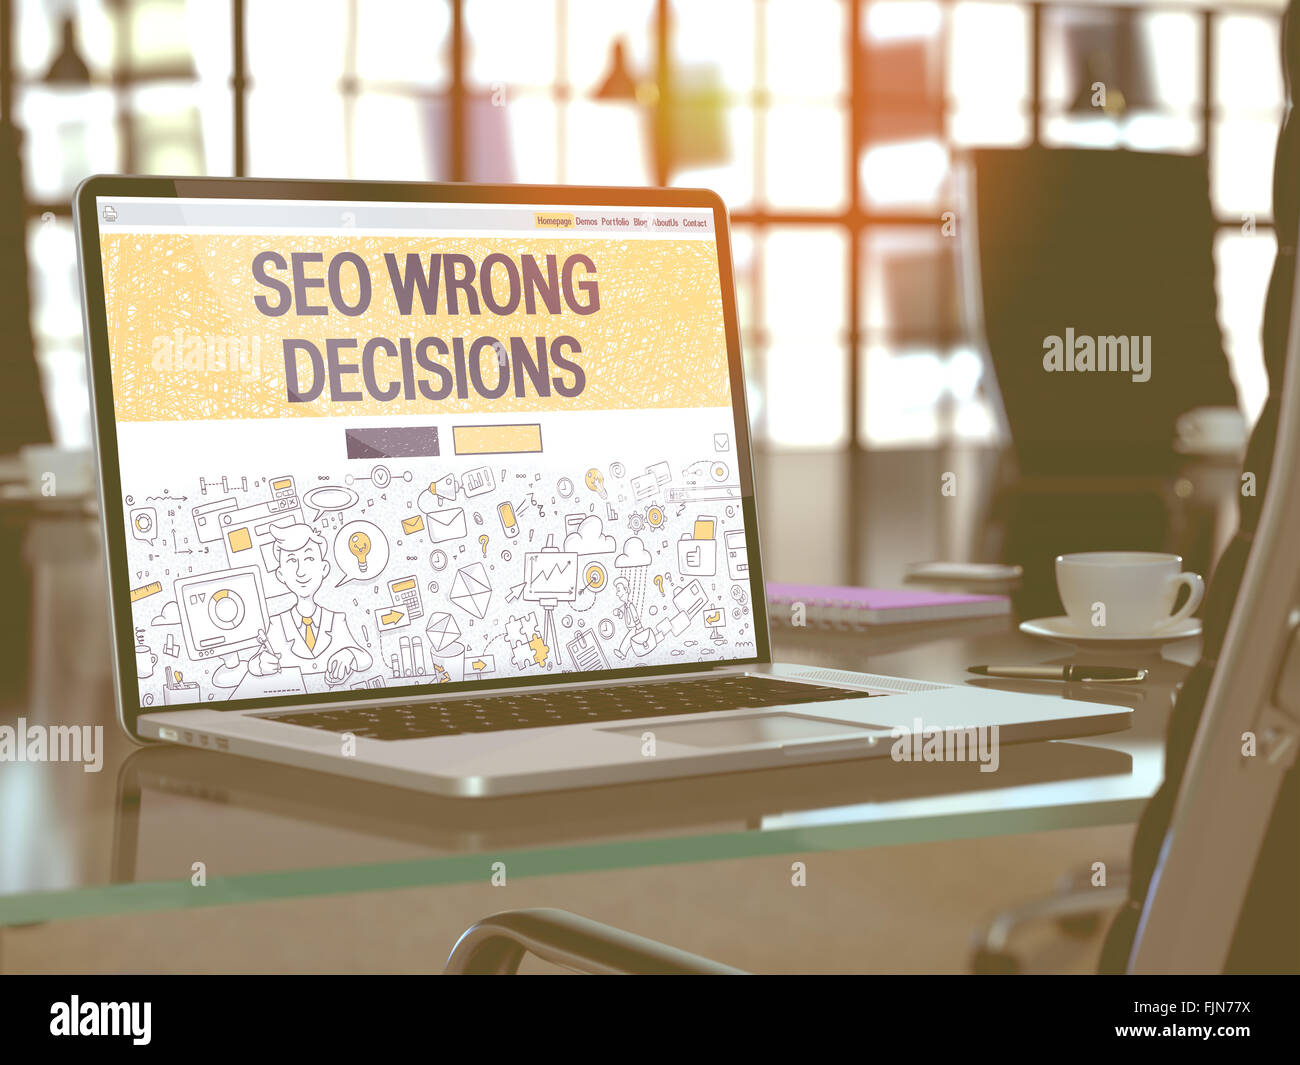 SEO Wrong Decisions Concept on Laptop Screen. Stock Photo